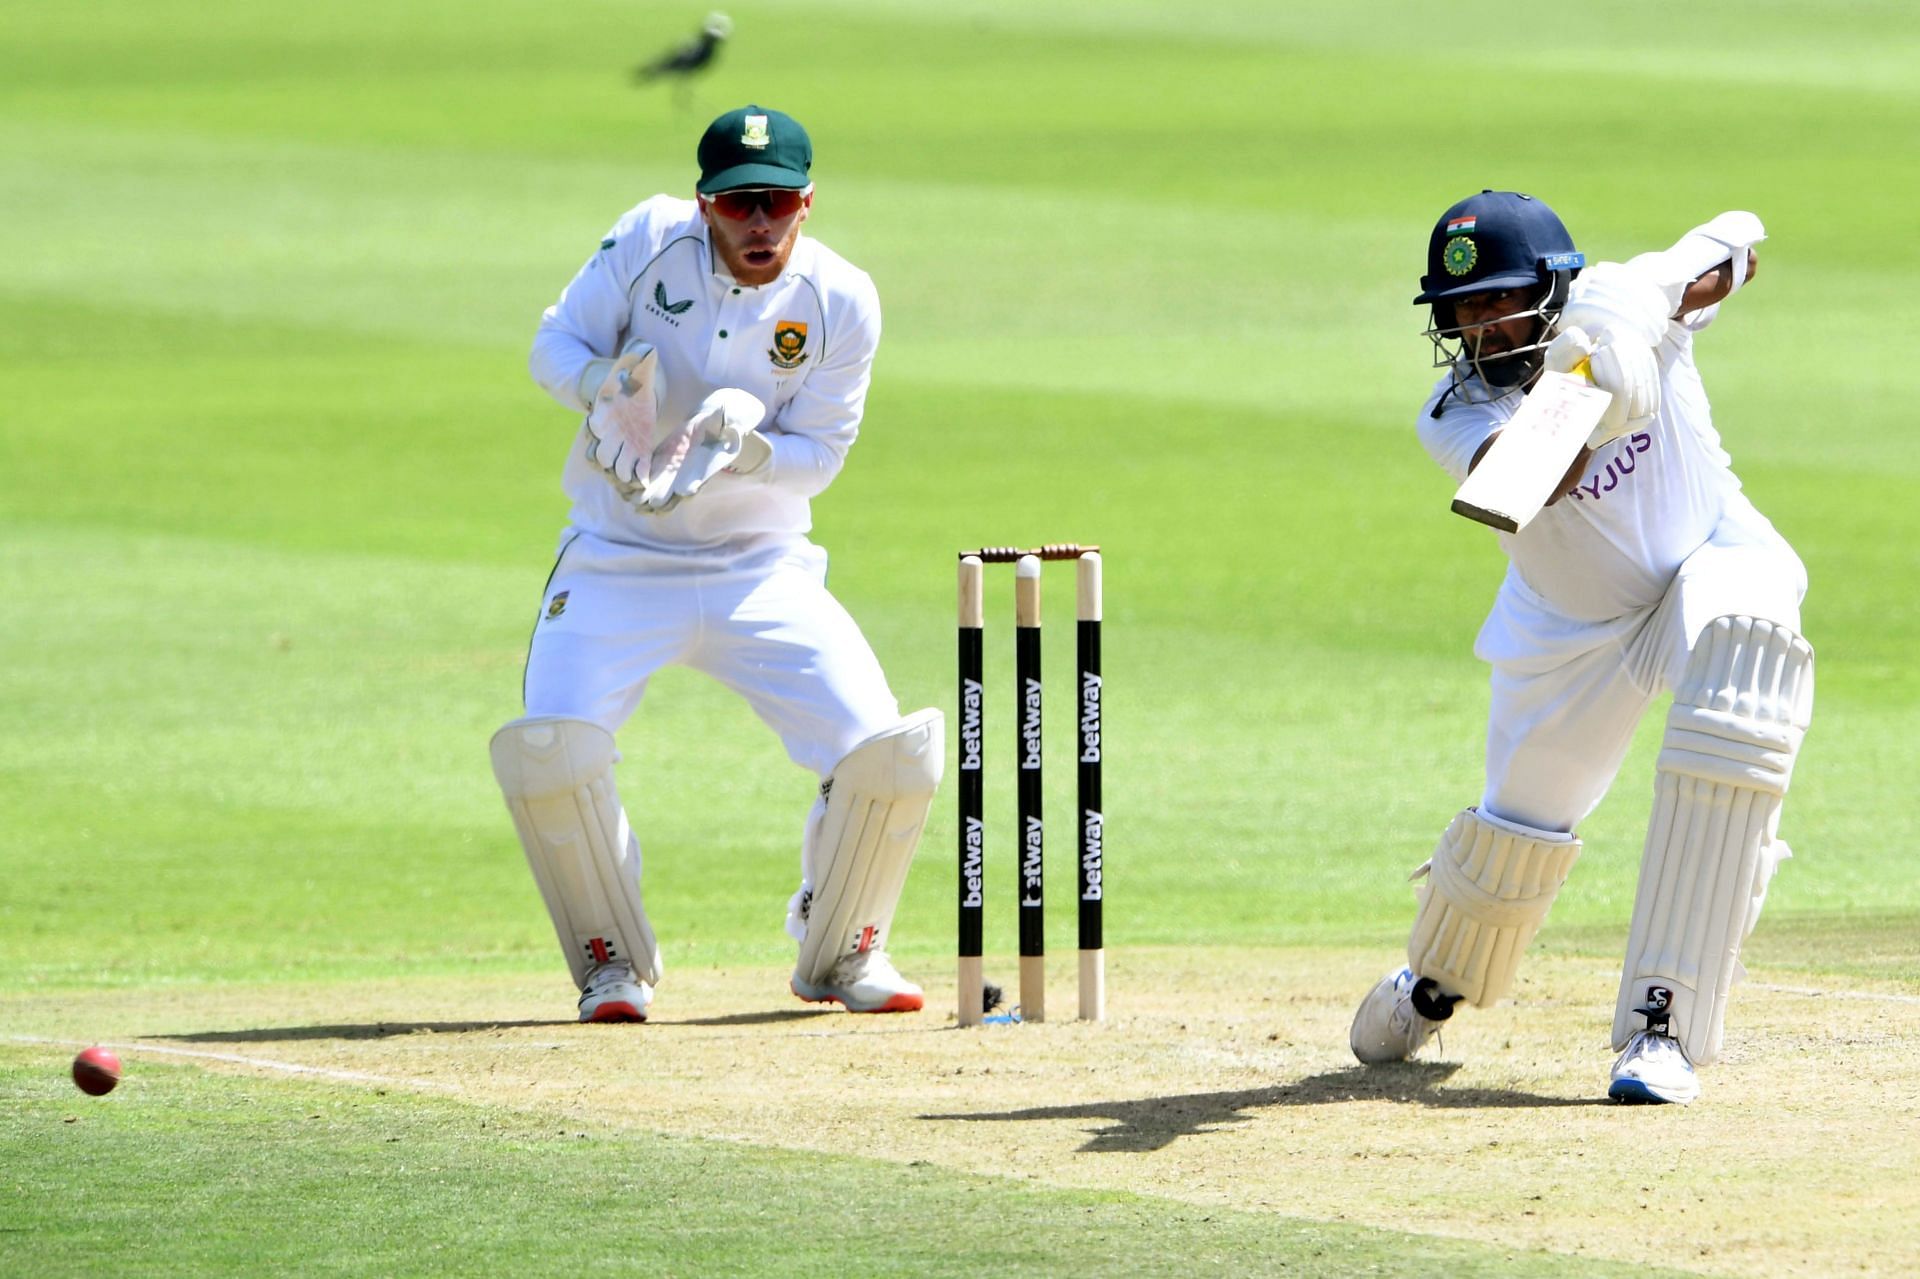 2nd Test: South Africa v India - Day 1